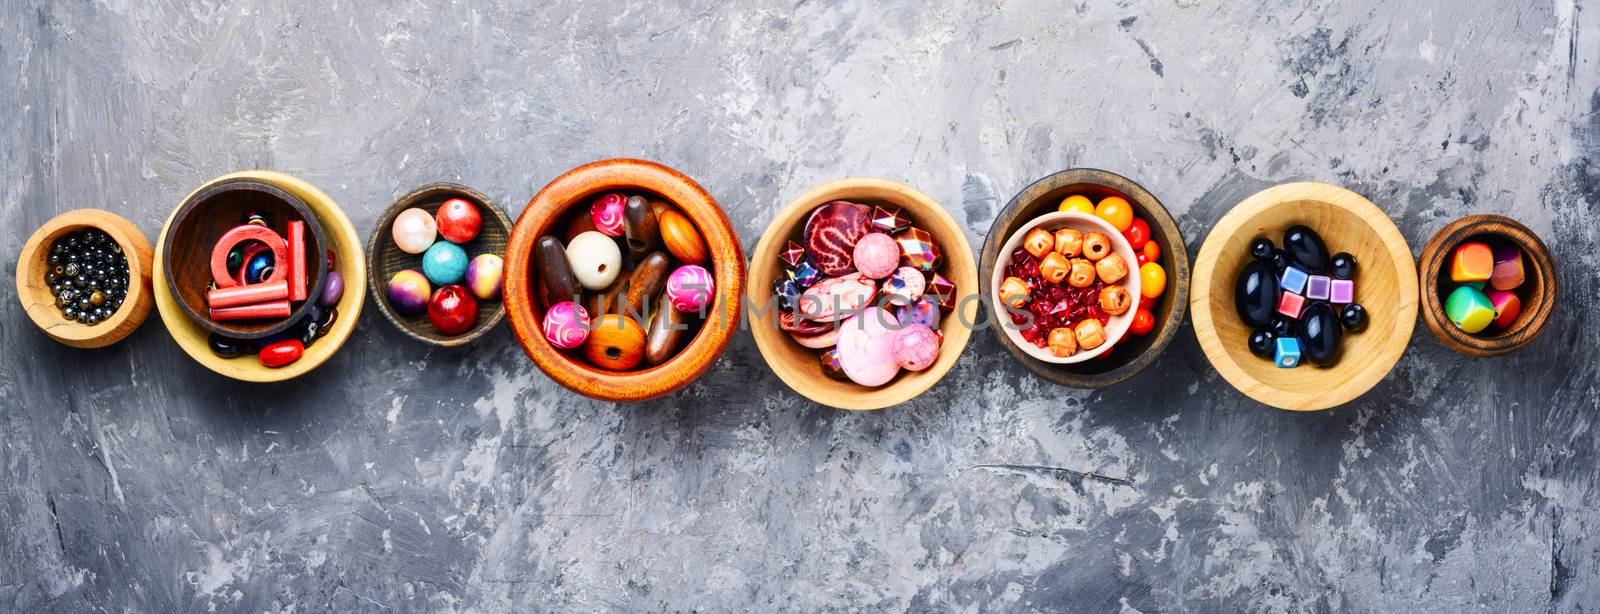 Colorful beads in wooden bowls by LMykola